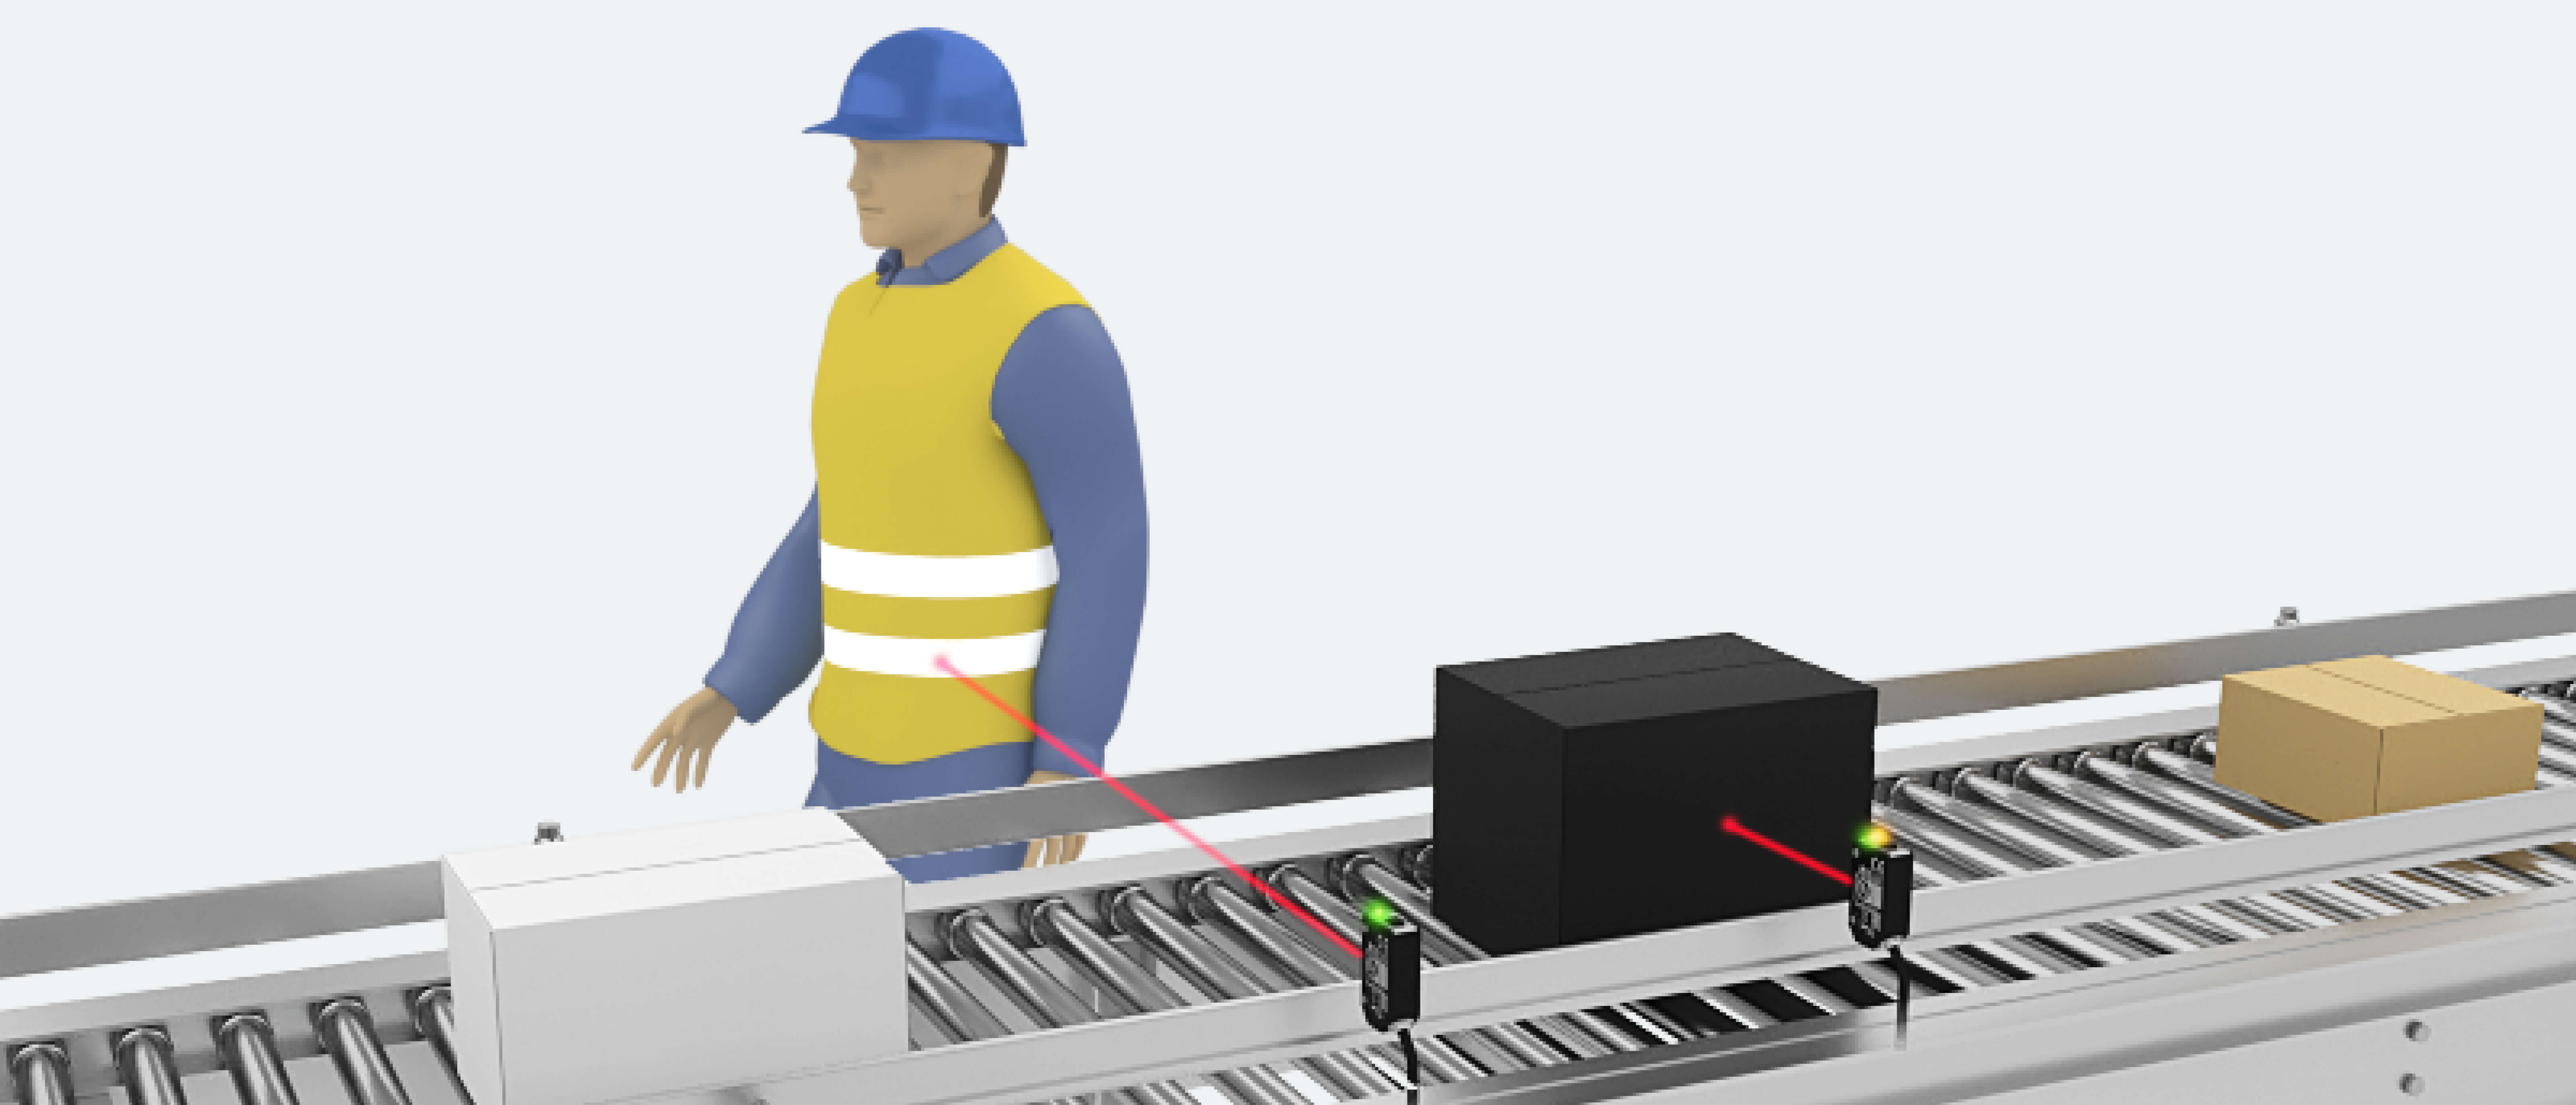 Sensors enable the detection of various workpieces on the conveyor line